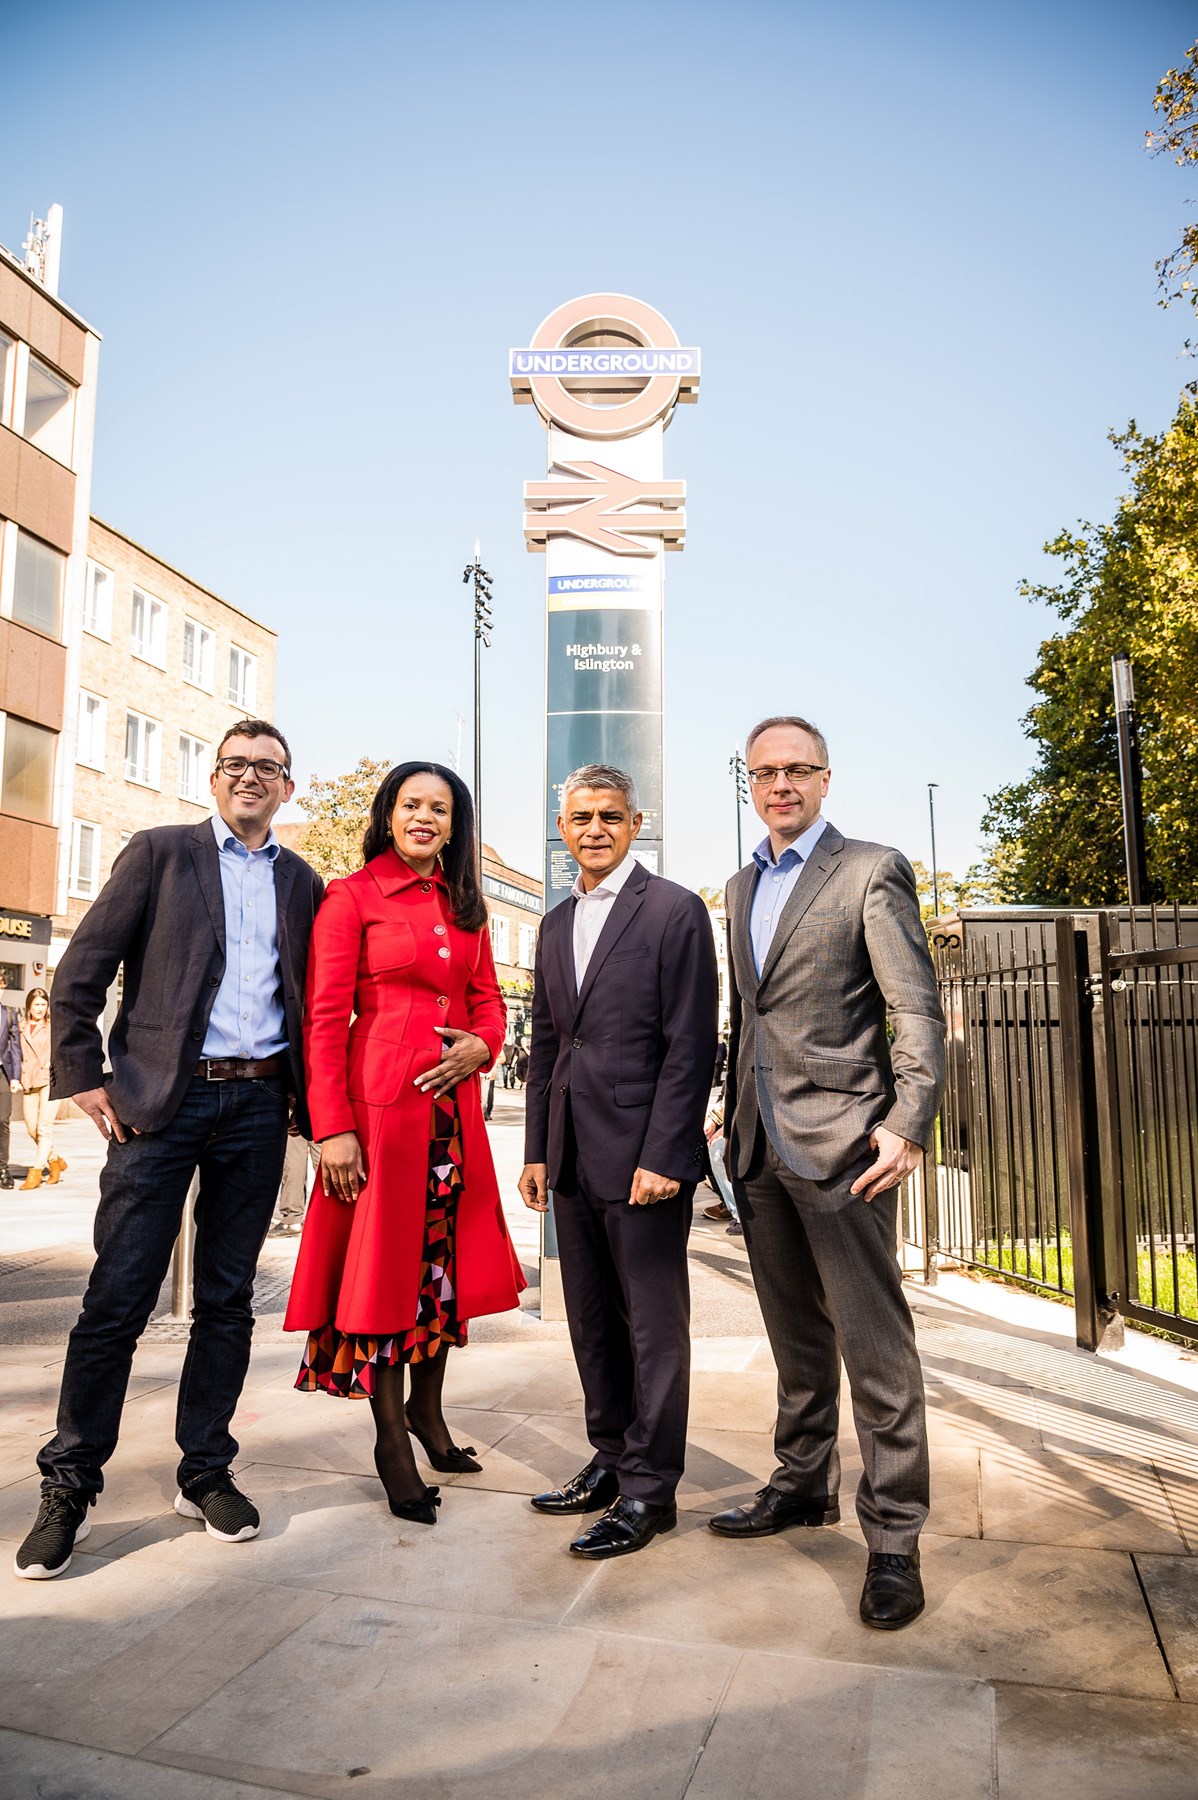 The official launch of the transformed Highbury Corner with (L-R) Will Norman, the Mayor of London's Walking and Cycling Commissioner; Cllr Webbe, Islington Council's executive member for environment and transport; Sadiq Khan, Mayor of London; and Cllr Richard Watts, Leader of Islington Council